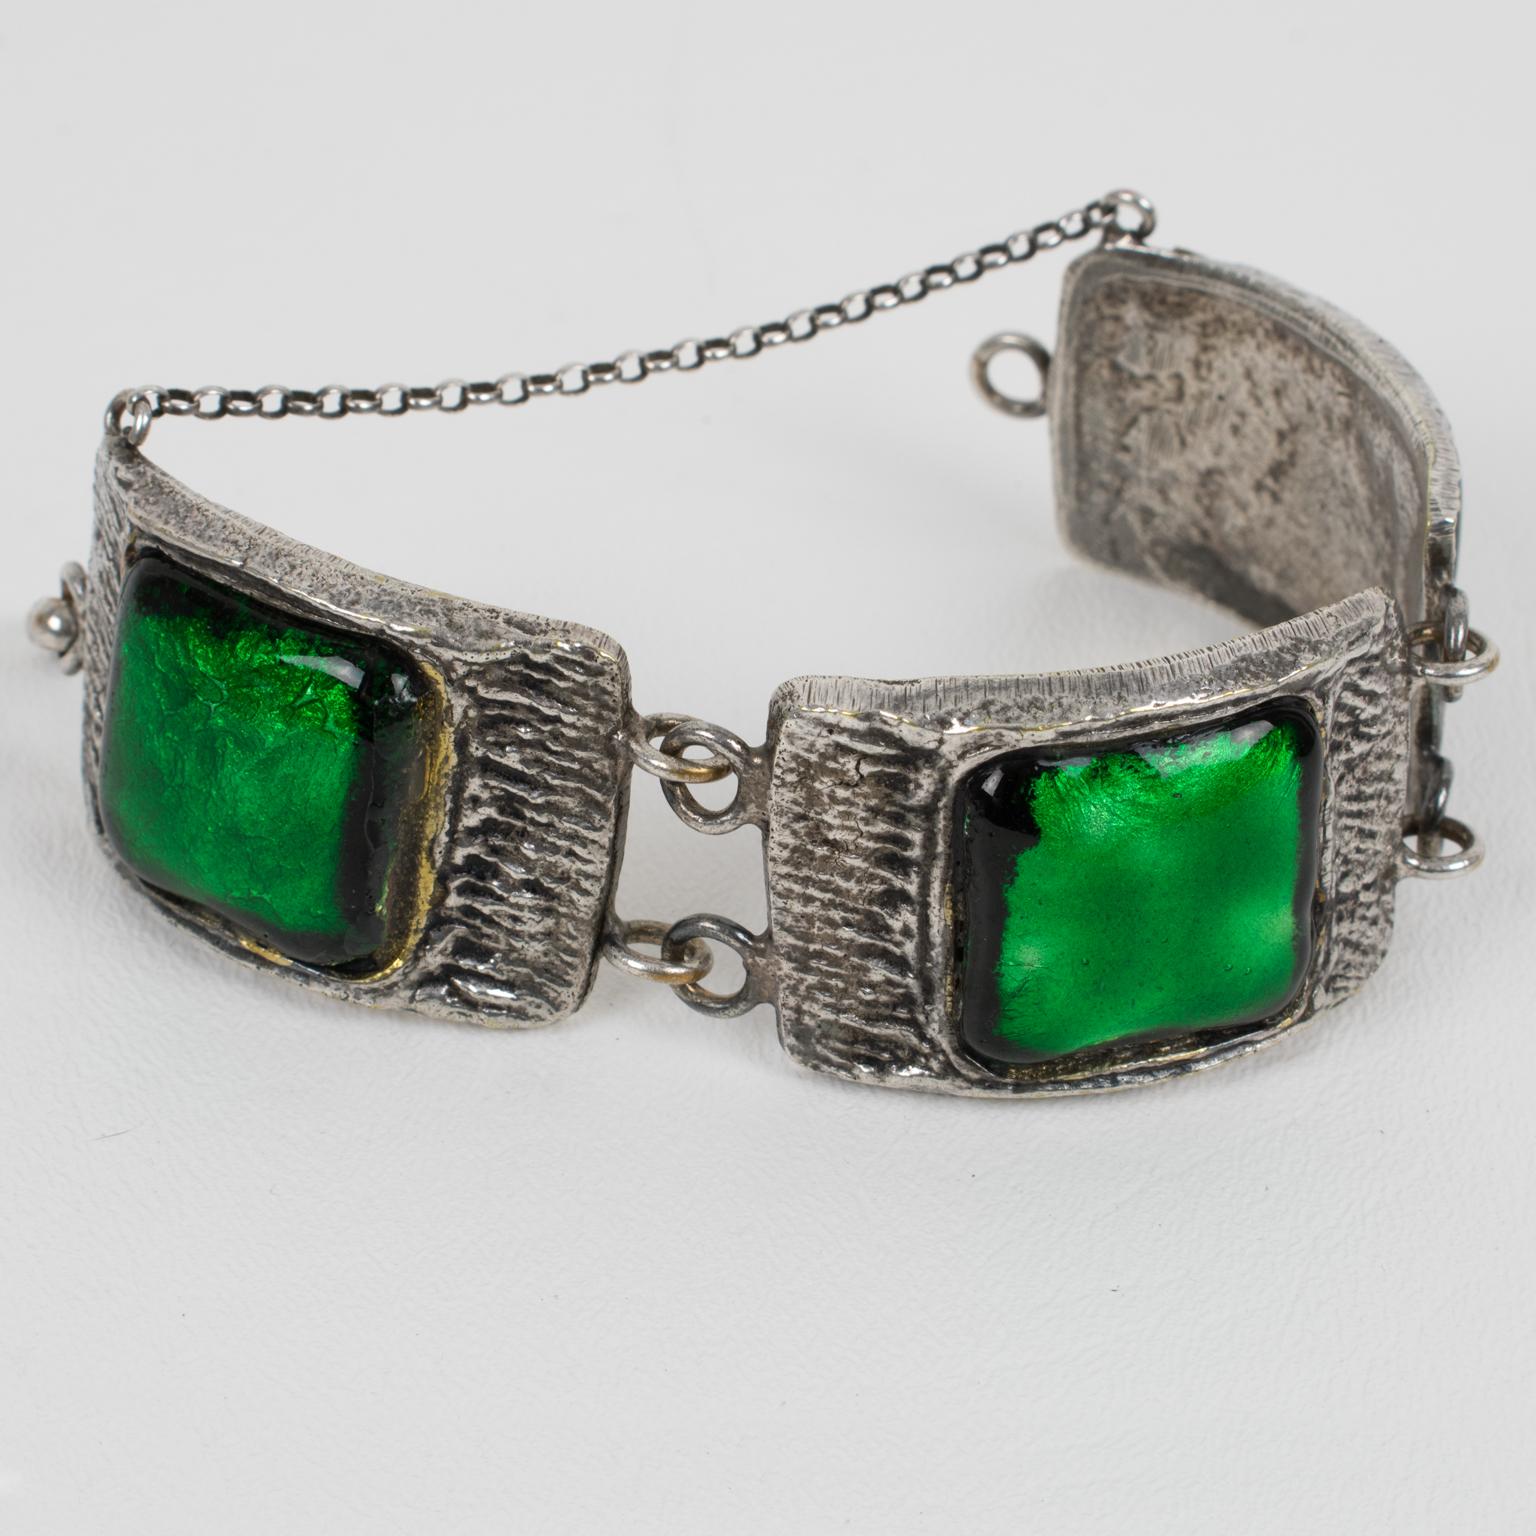 Modernist French Designer Willy Silvered Bronze and Green Glass Link Bracelet, 1950s For Sale